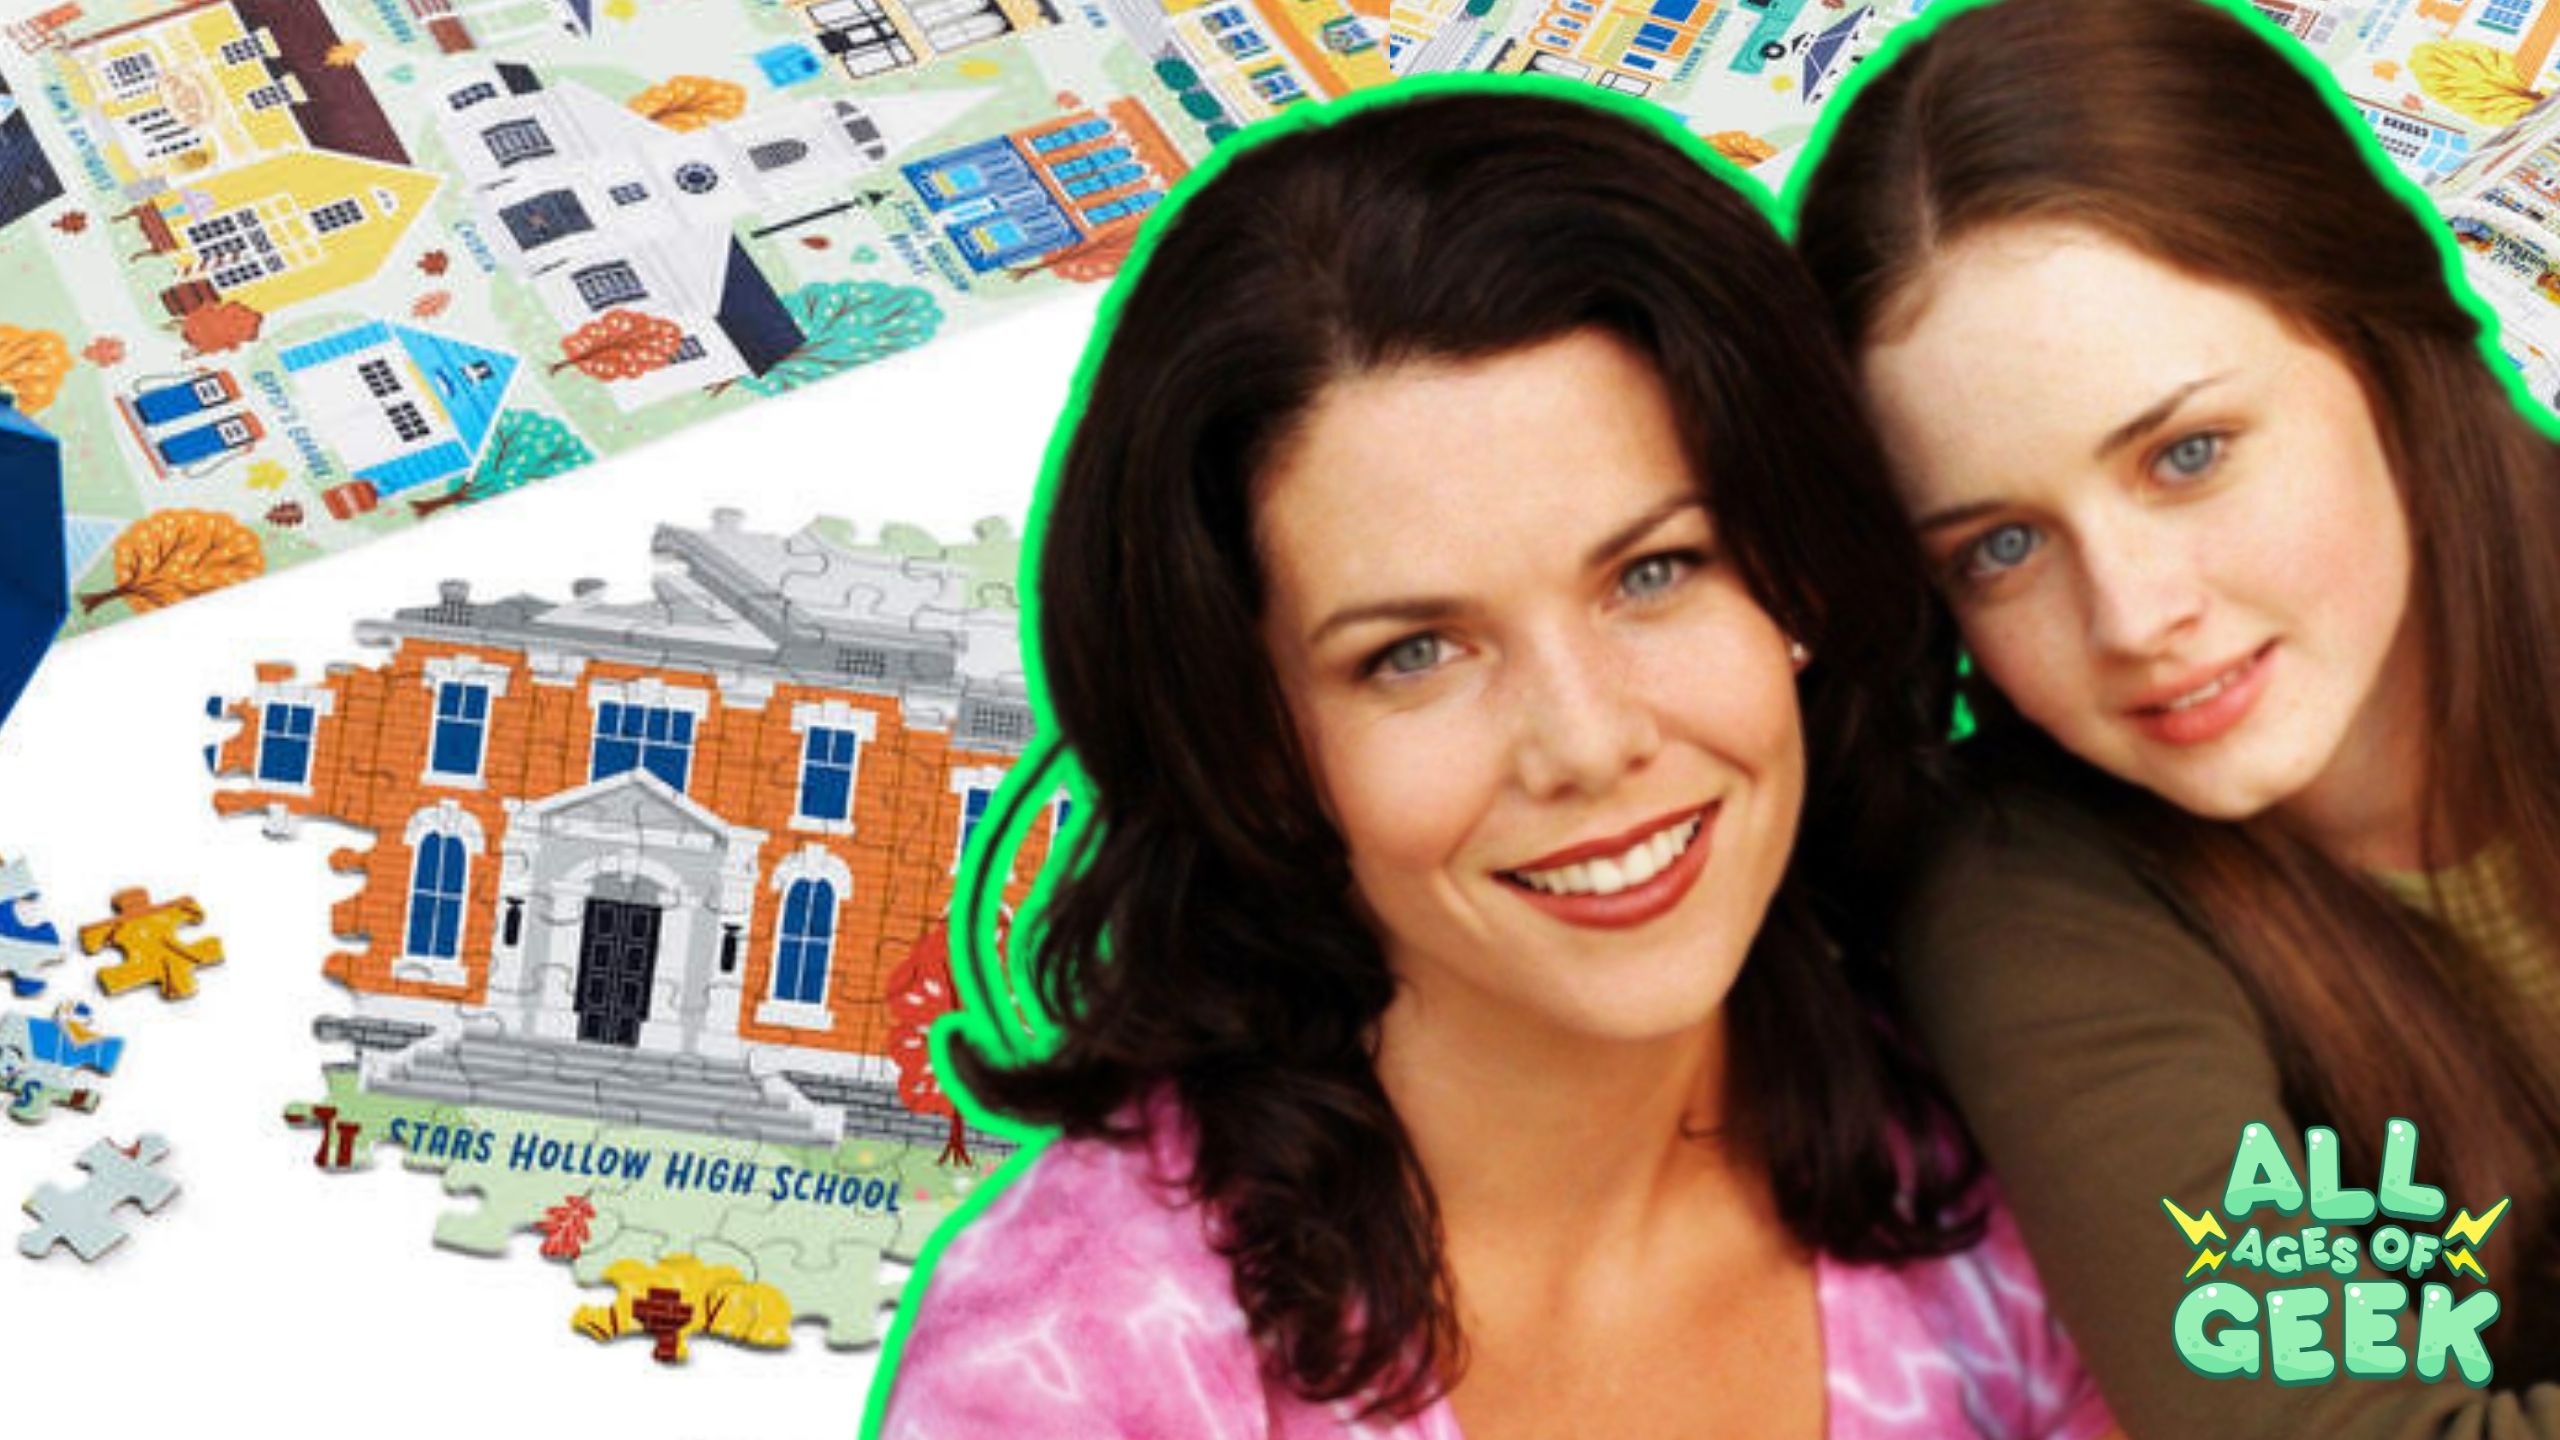 Puzzle of Stars Hollow with 1,000 Pieces Gilmore Girls Style